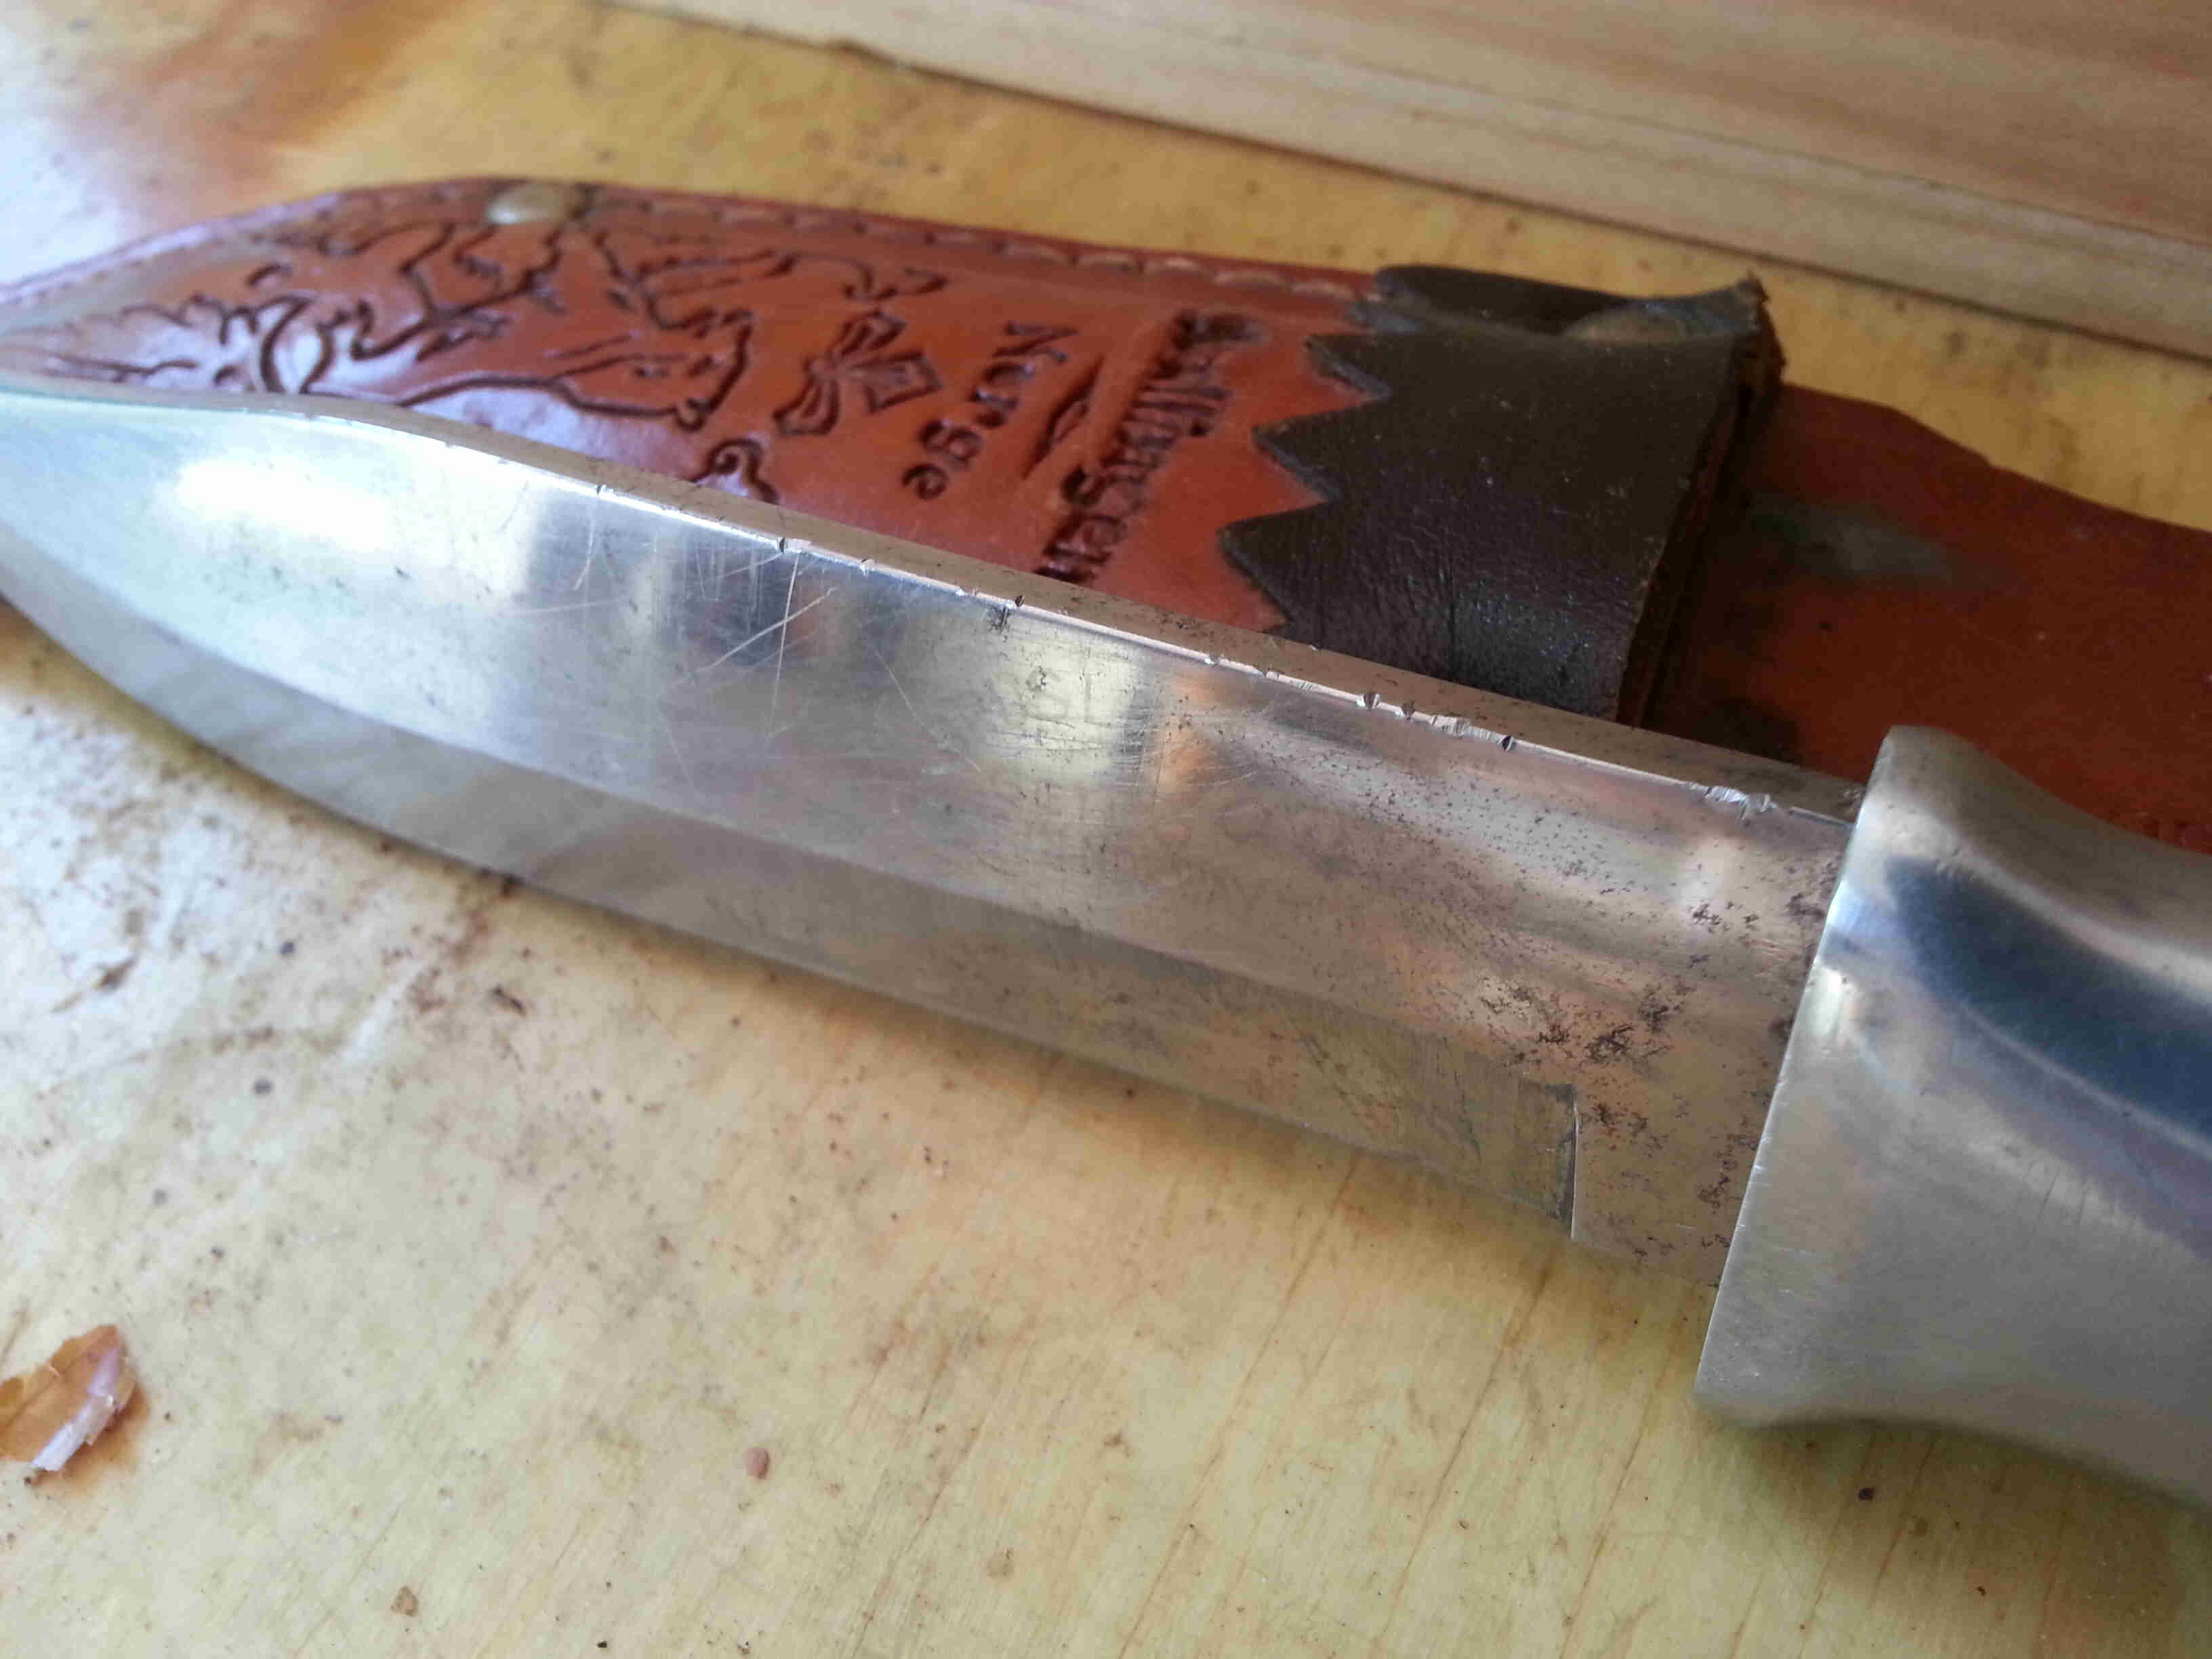 Horizontal view of a silver knife blade, standing on the cutting edge, leaning on a leather sheath